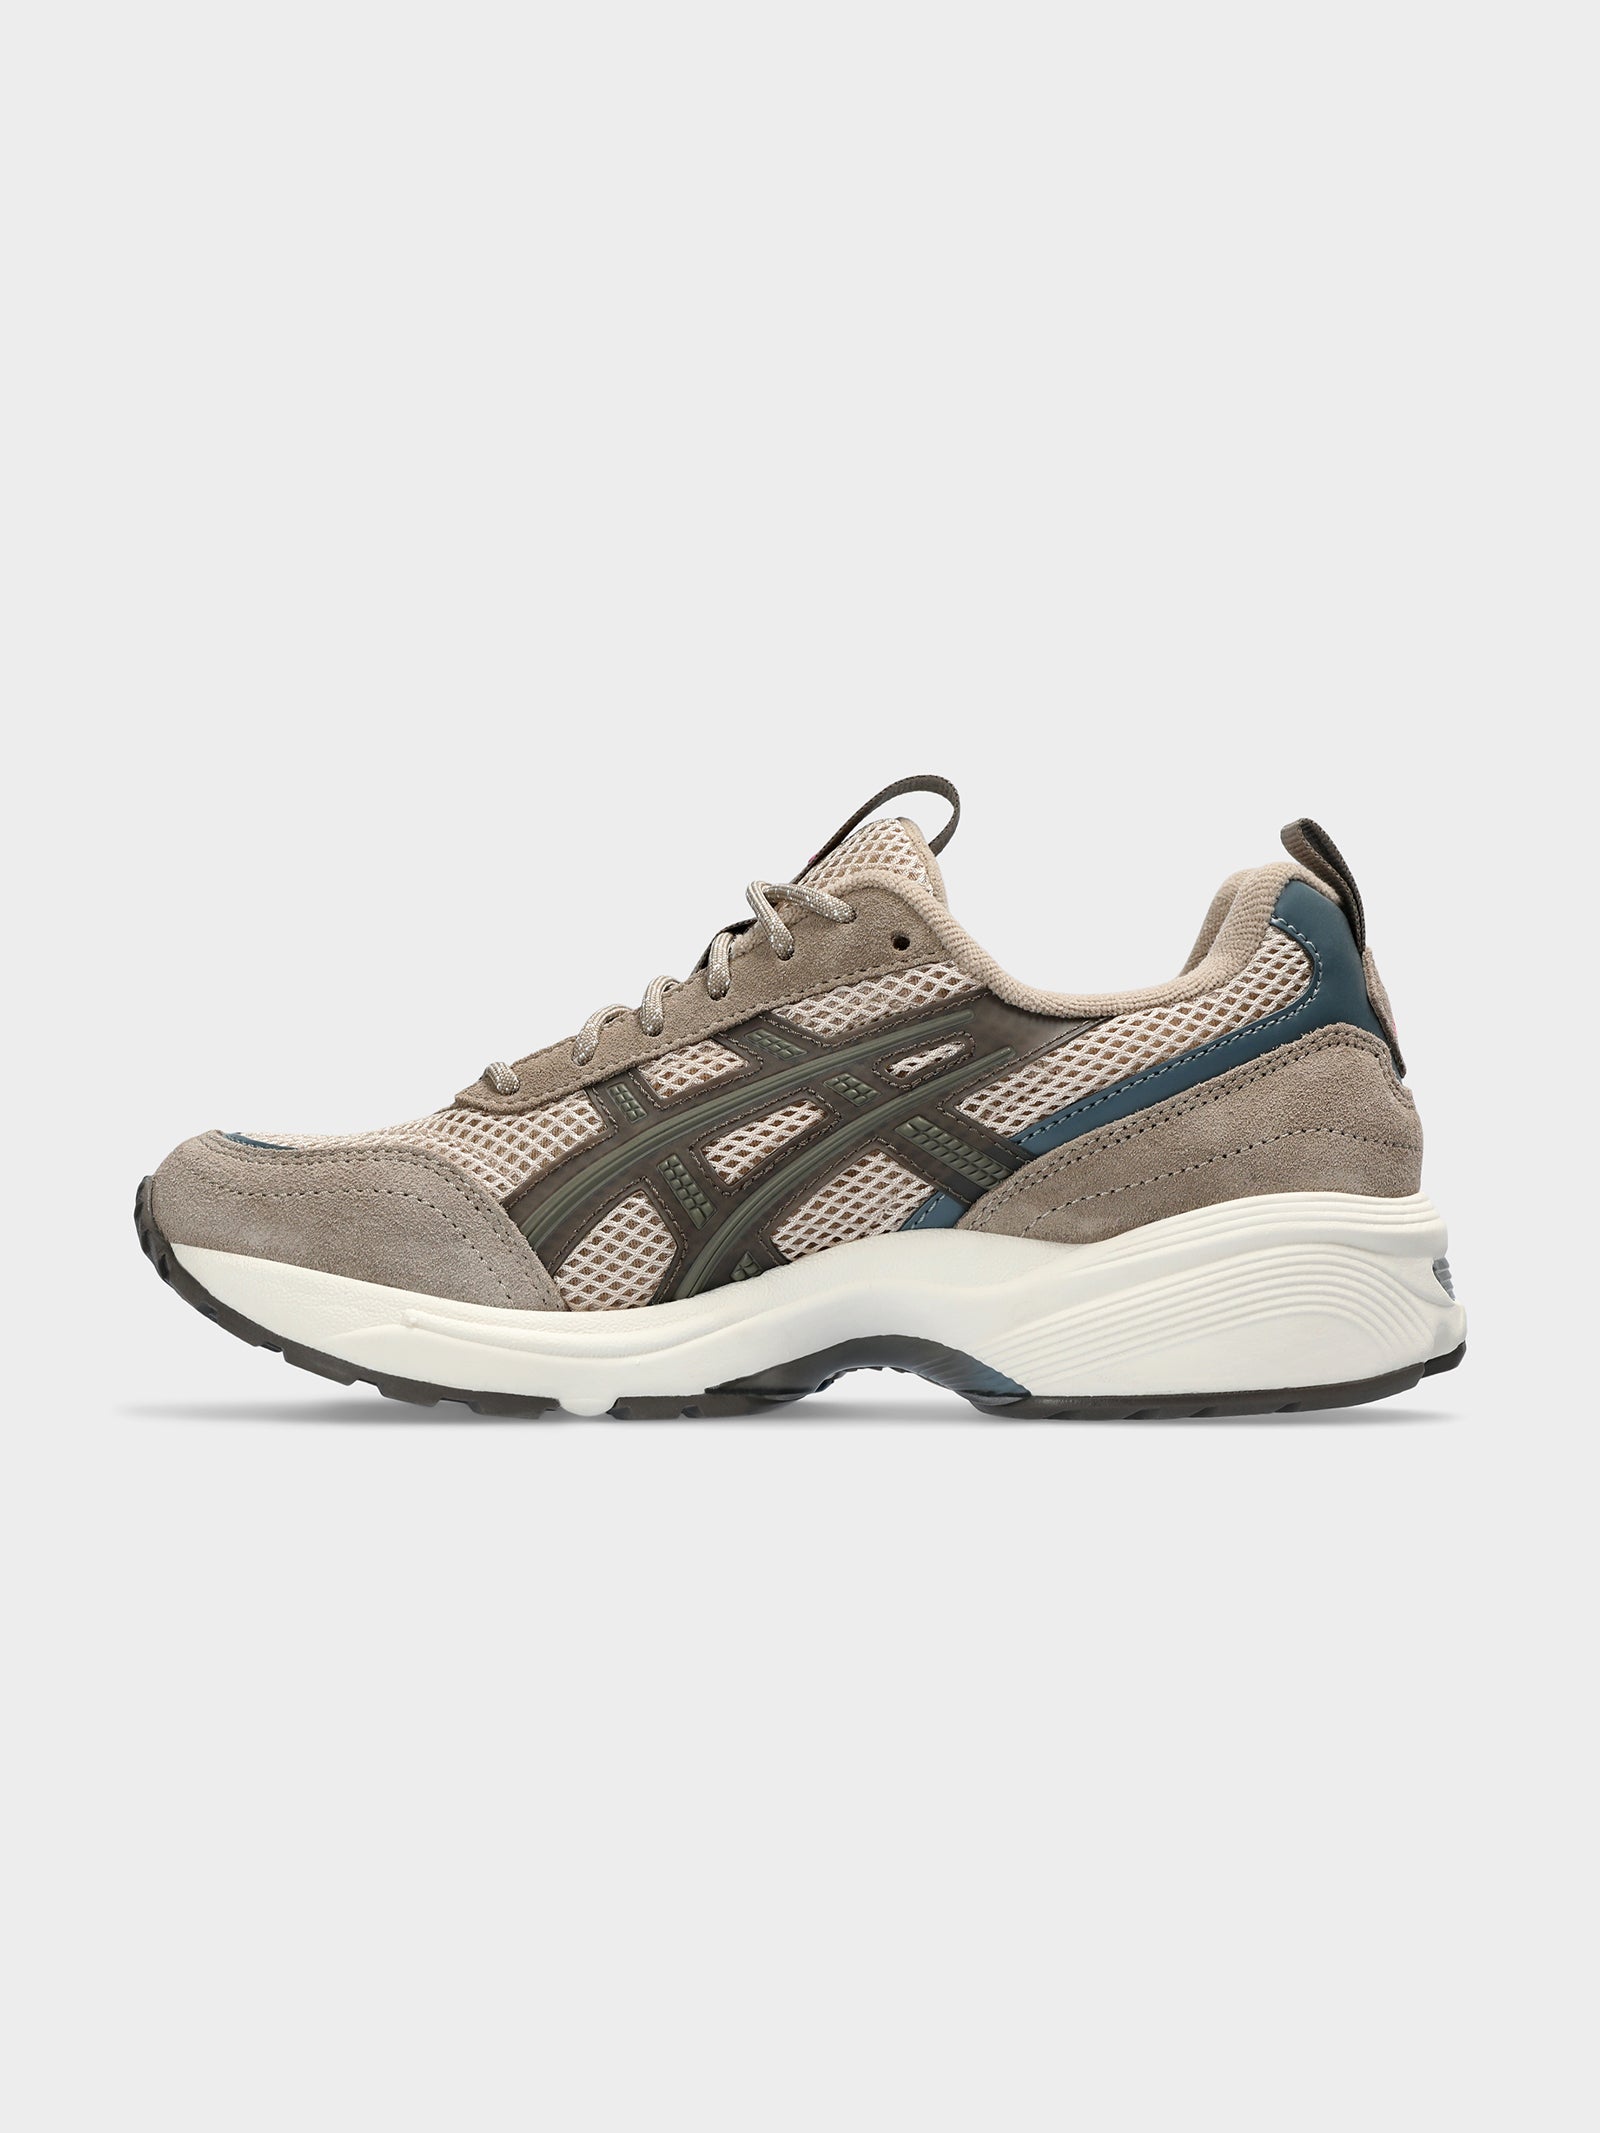 Womens Gel-1090 V2 Sneakers in Simply Taupe & Dark Taupe